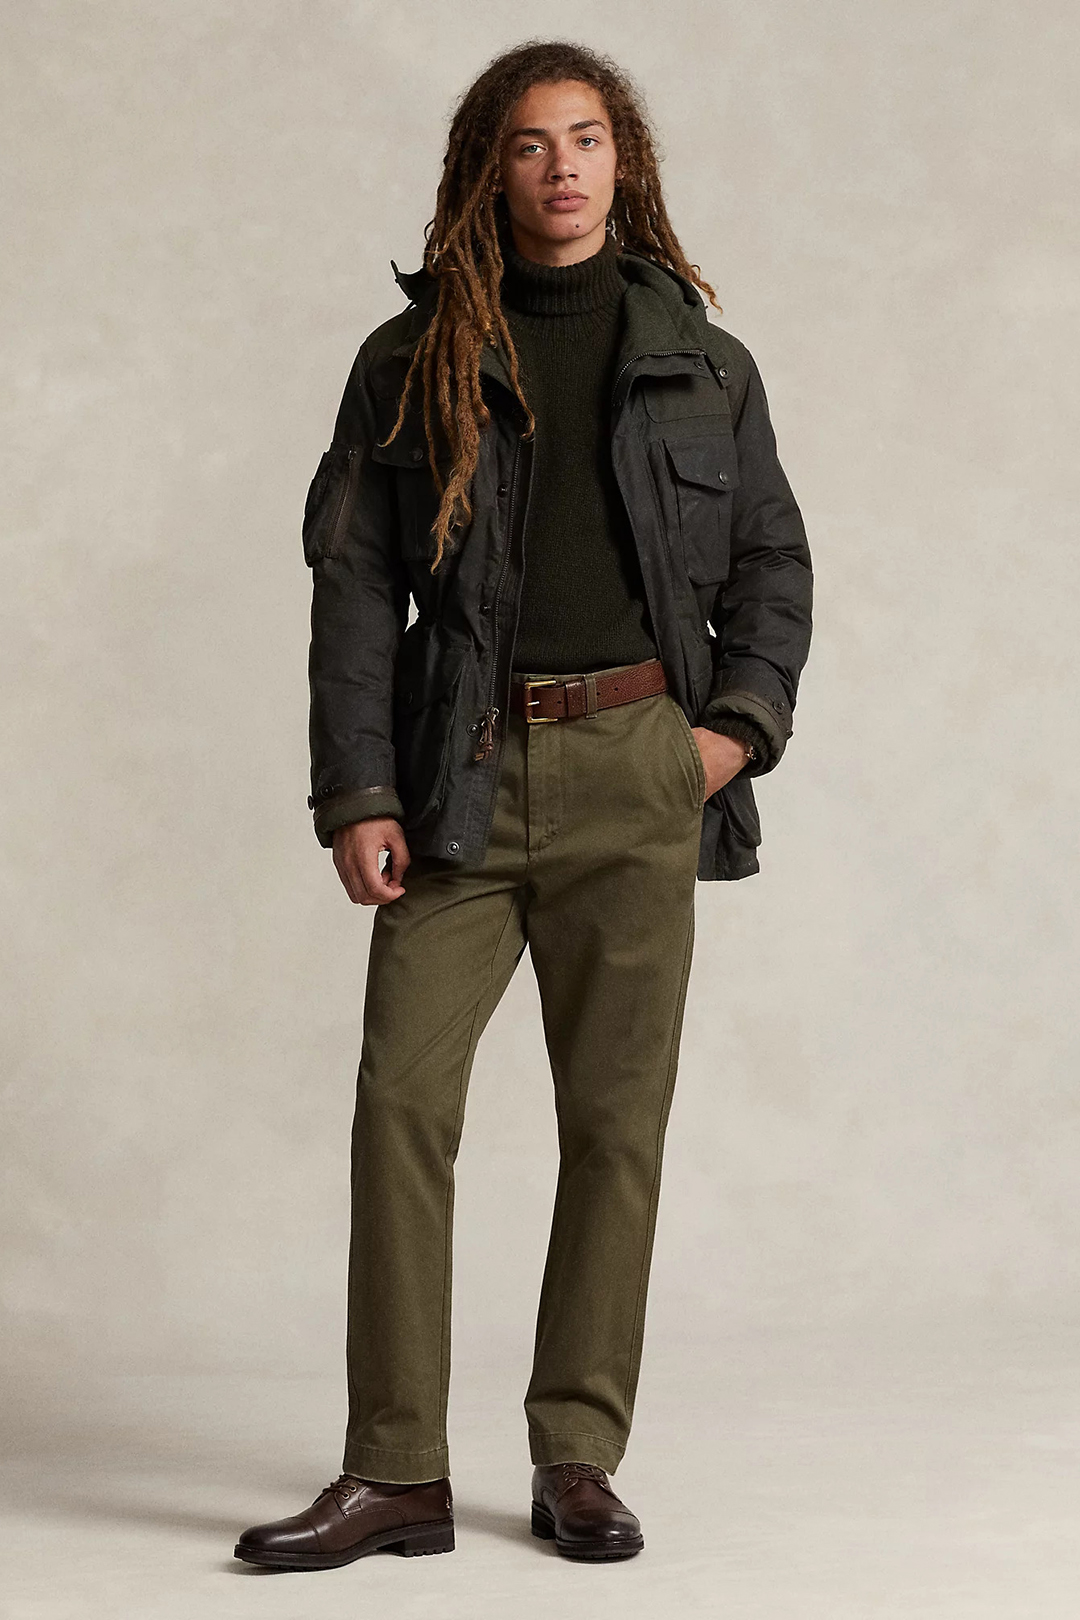 Dark green jacket, green turtleneck, olive chinos, and brown derby shoes outfit